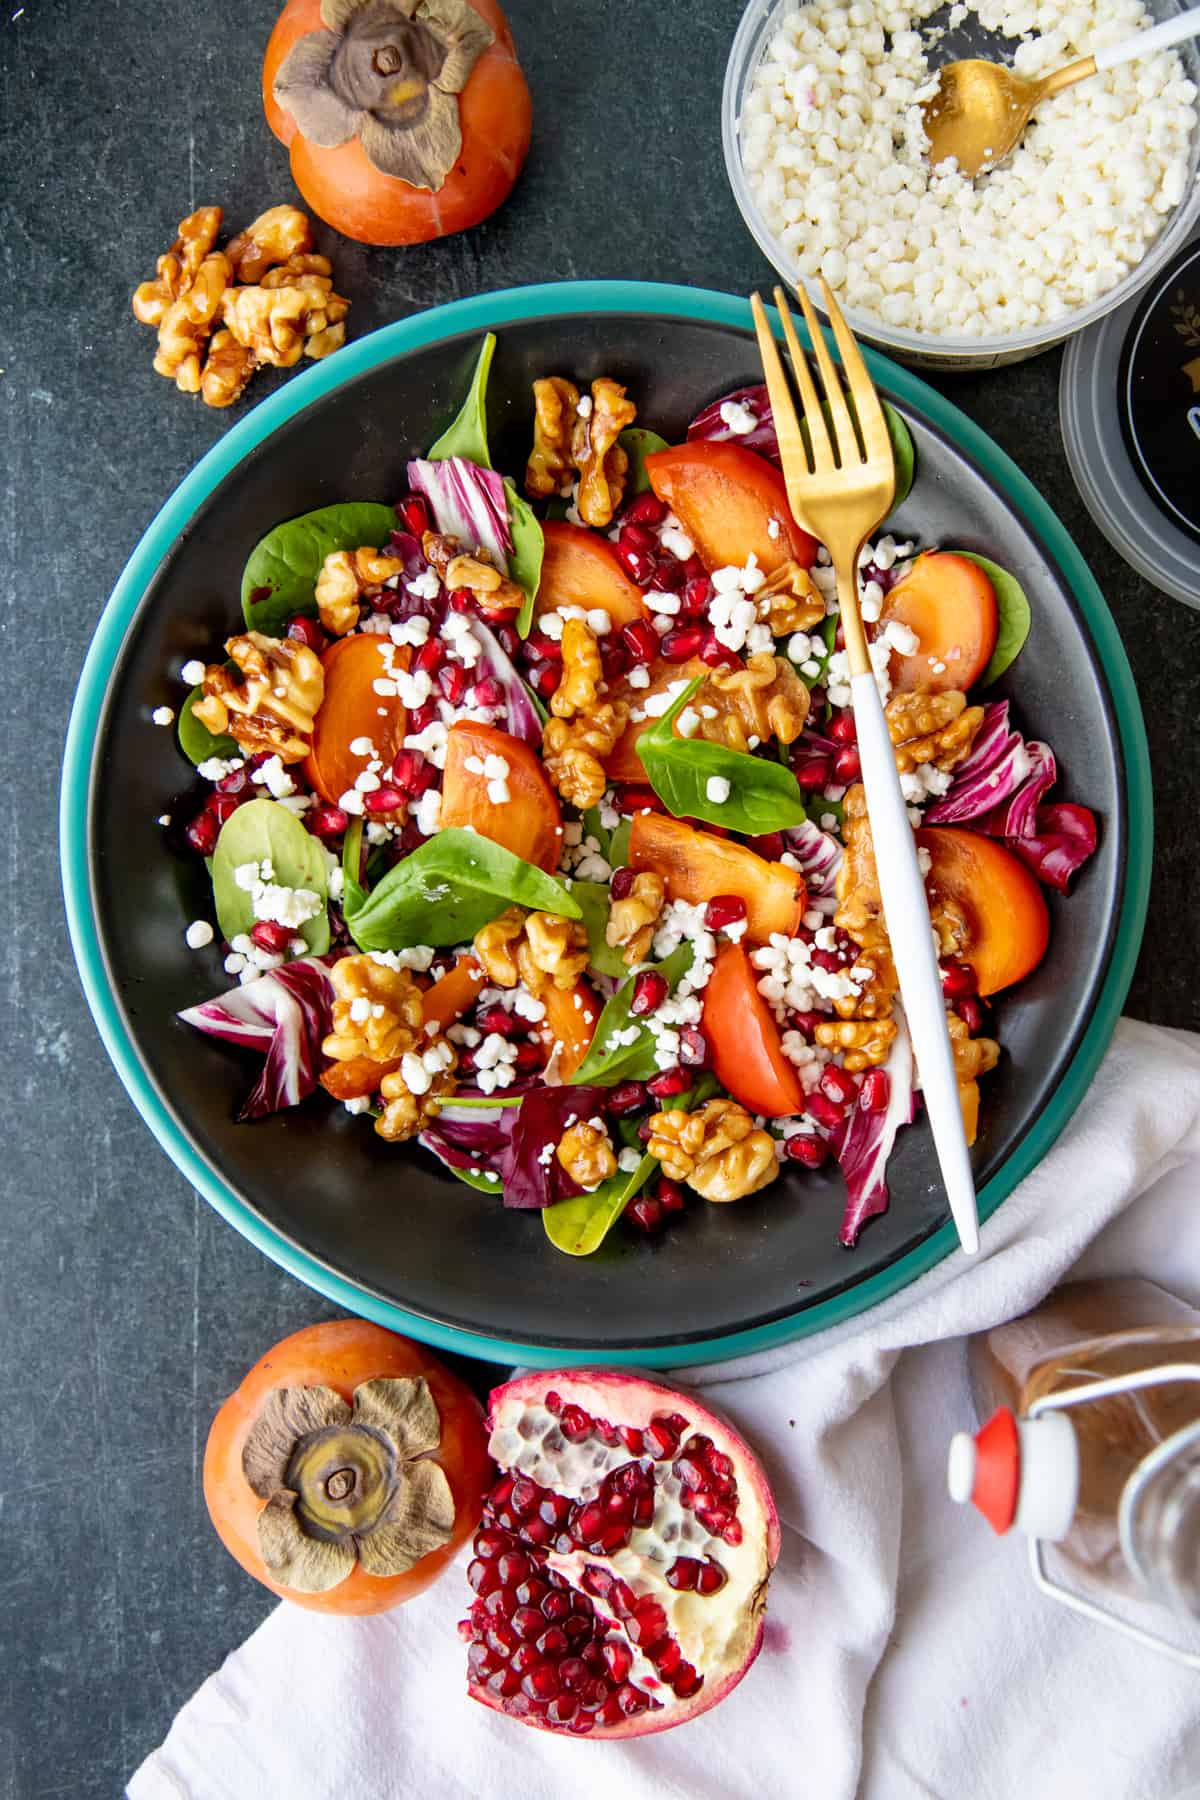 Persimmon and Pomegranate Salad with Maple Vinaigrette and Candied Walnuts